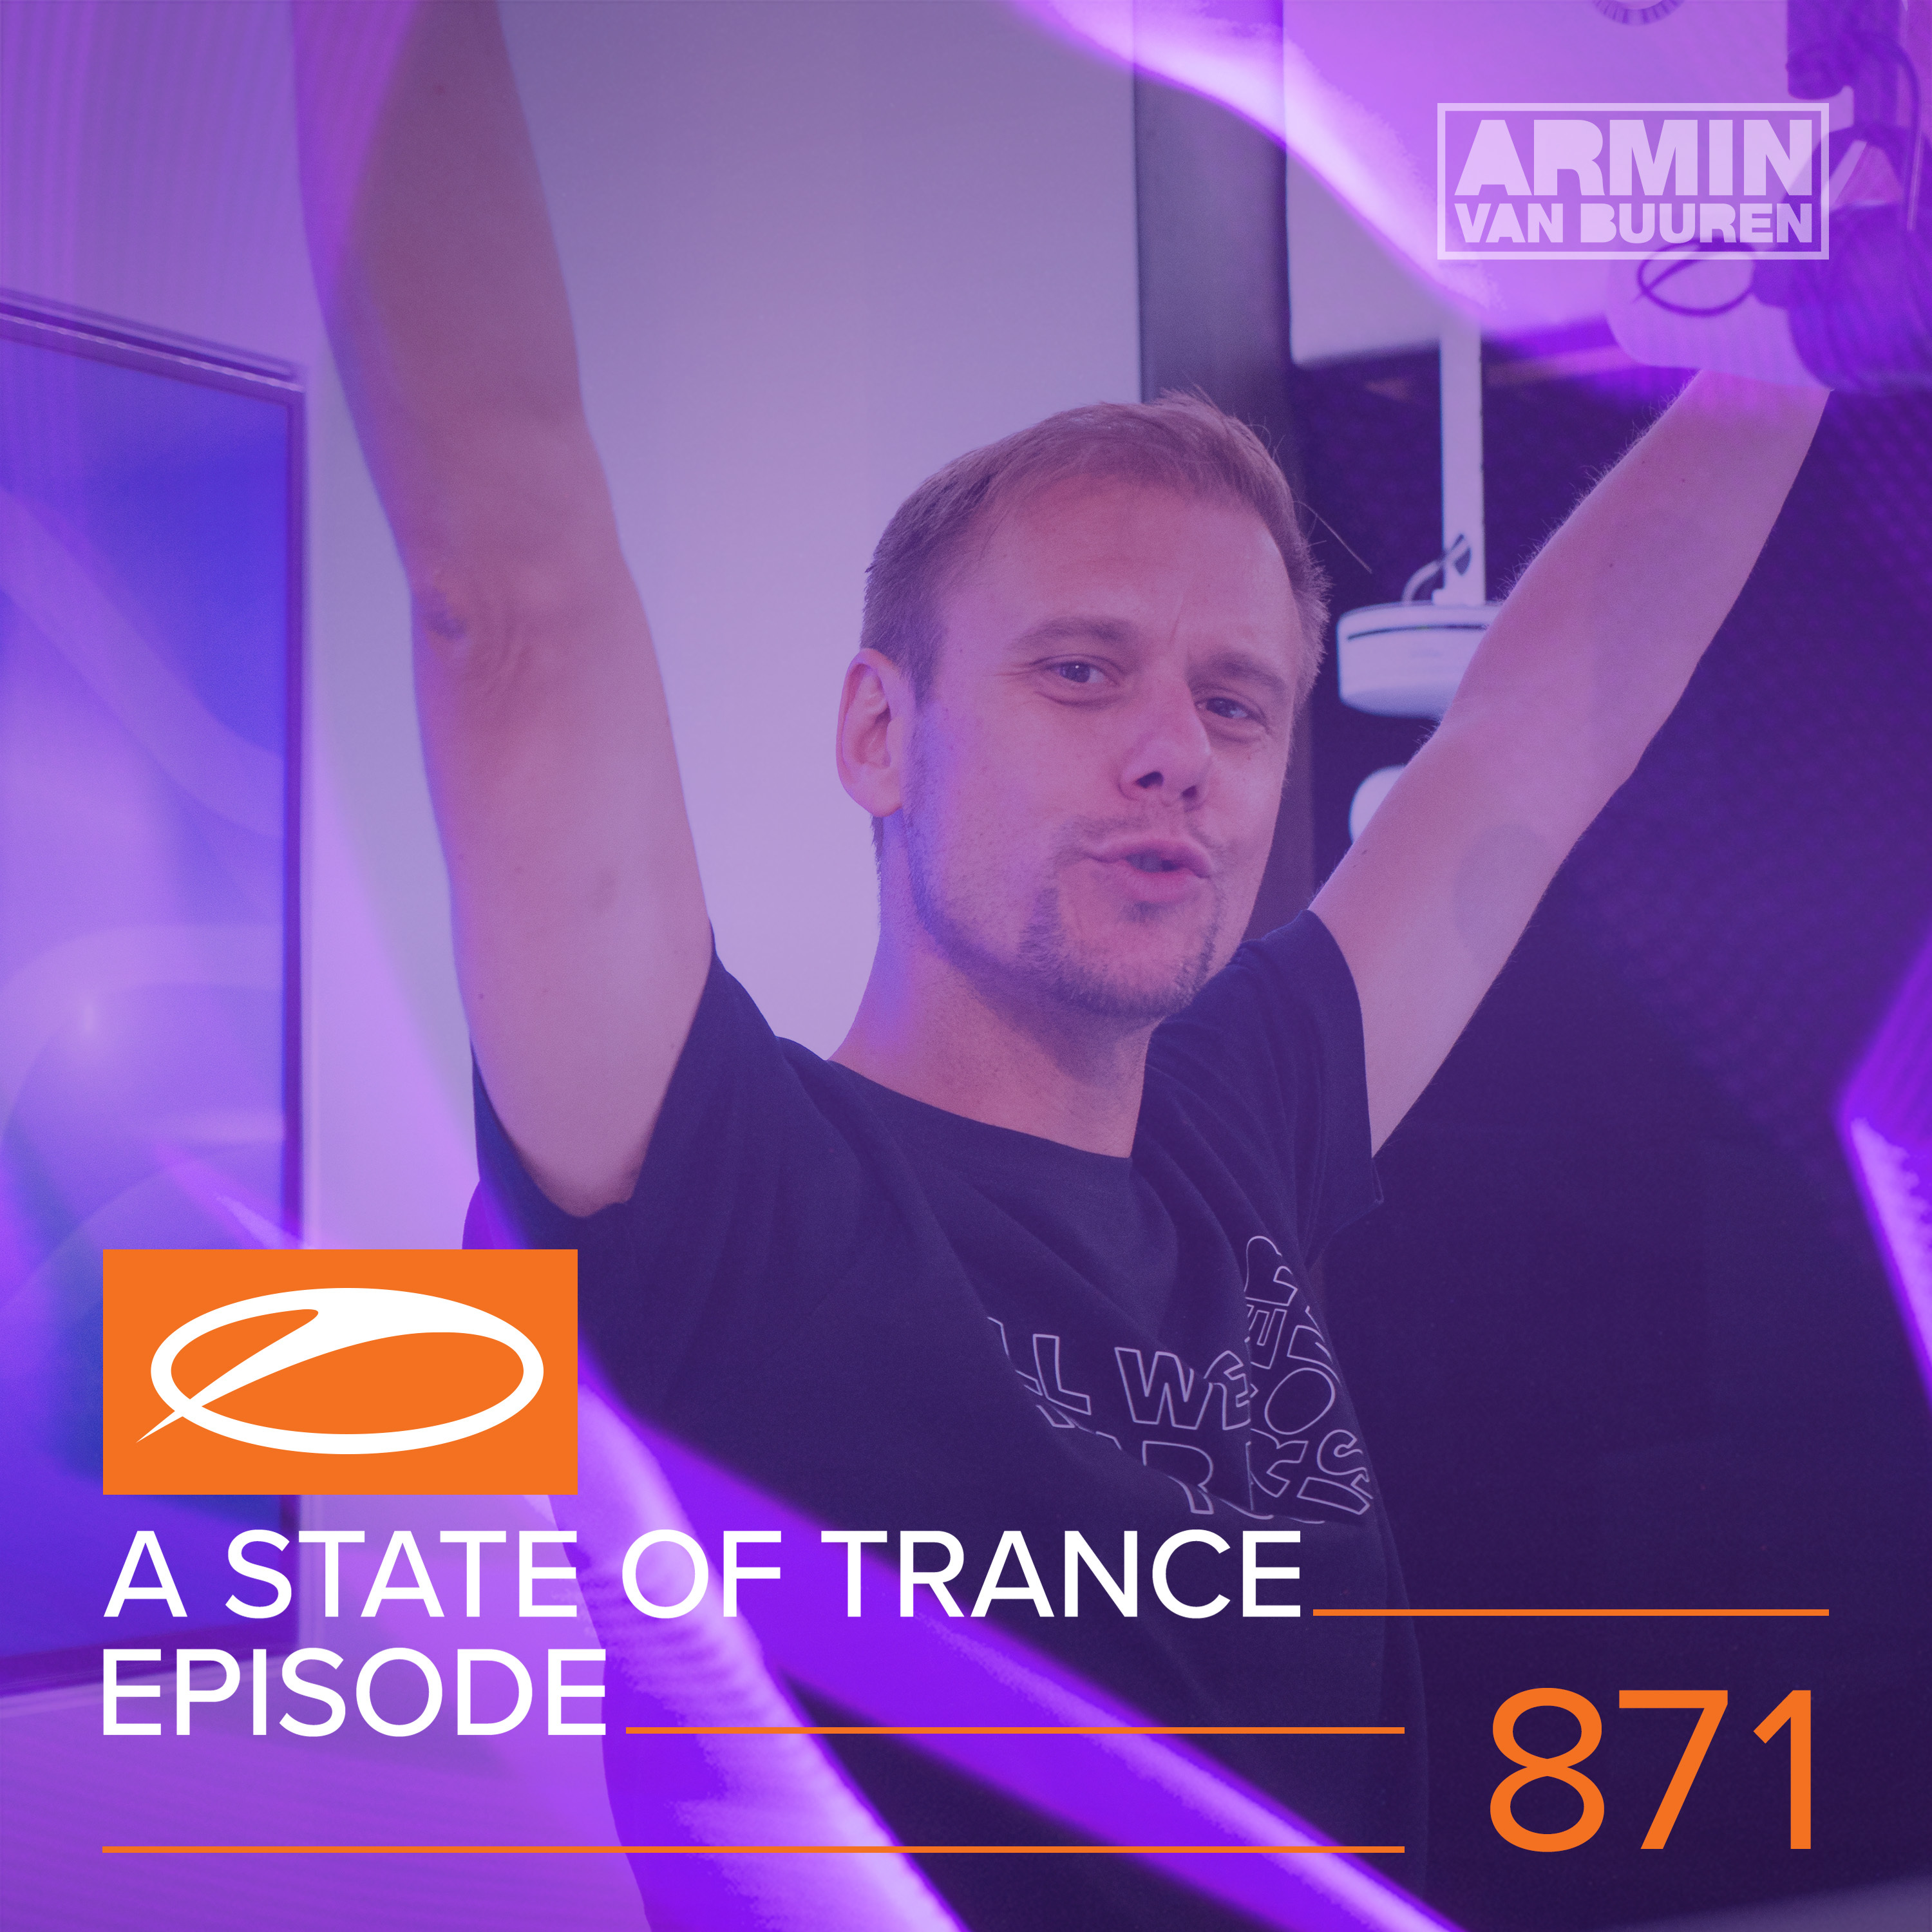 A State Of Trance (ASOT 871) (Shout Outs, Pt. 2)